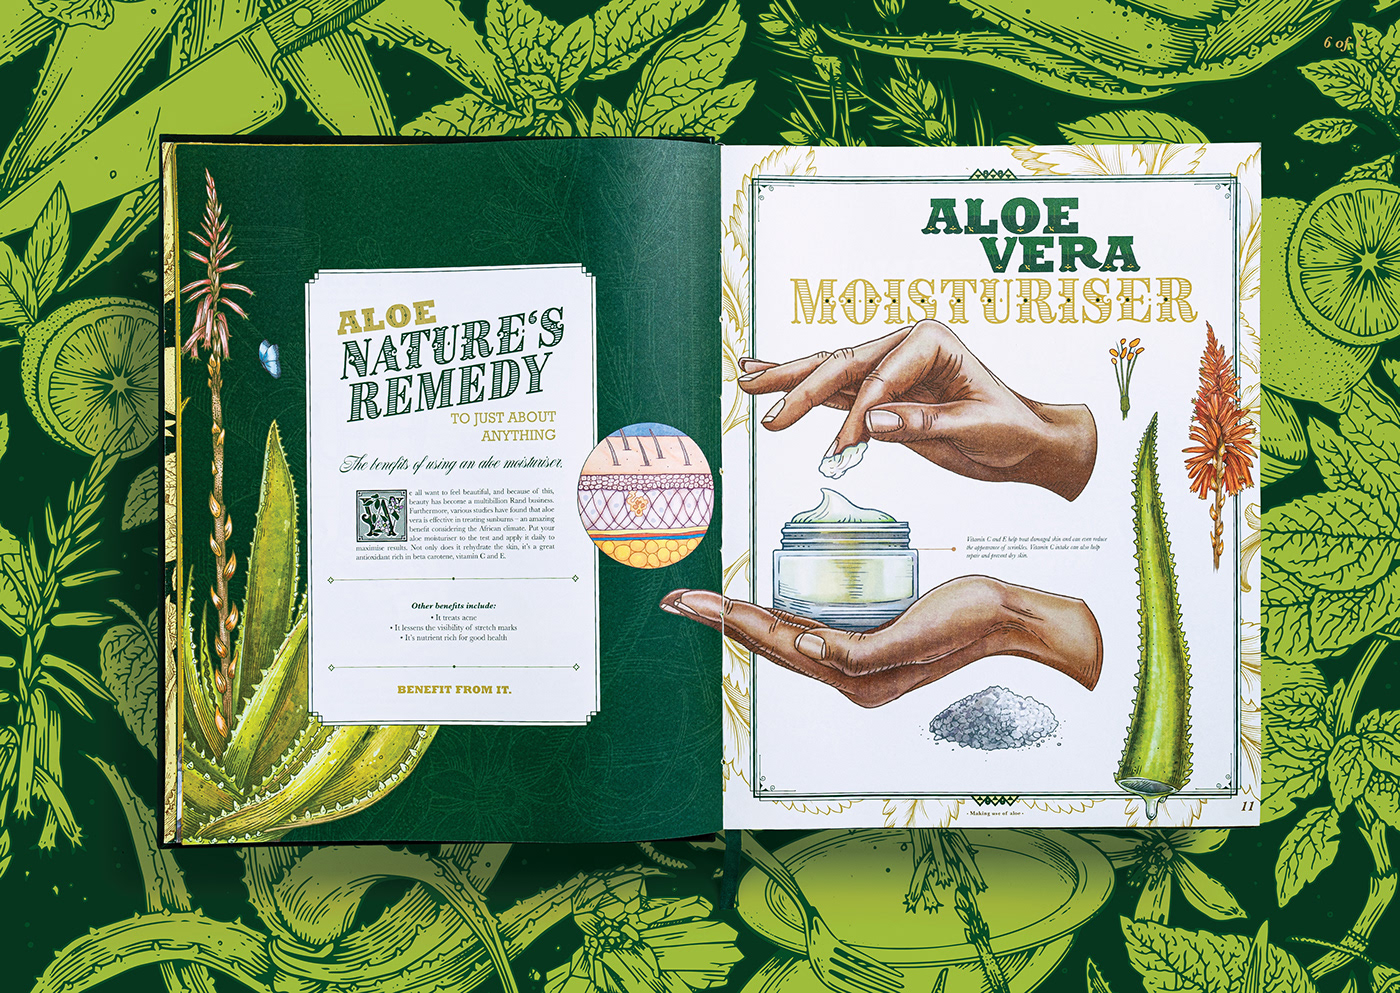 book design dig dishes green identity ingredients Nature planting plants